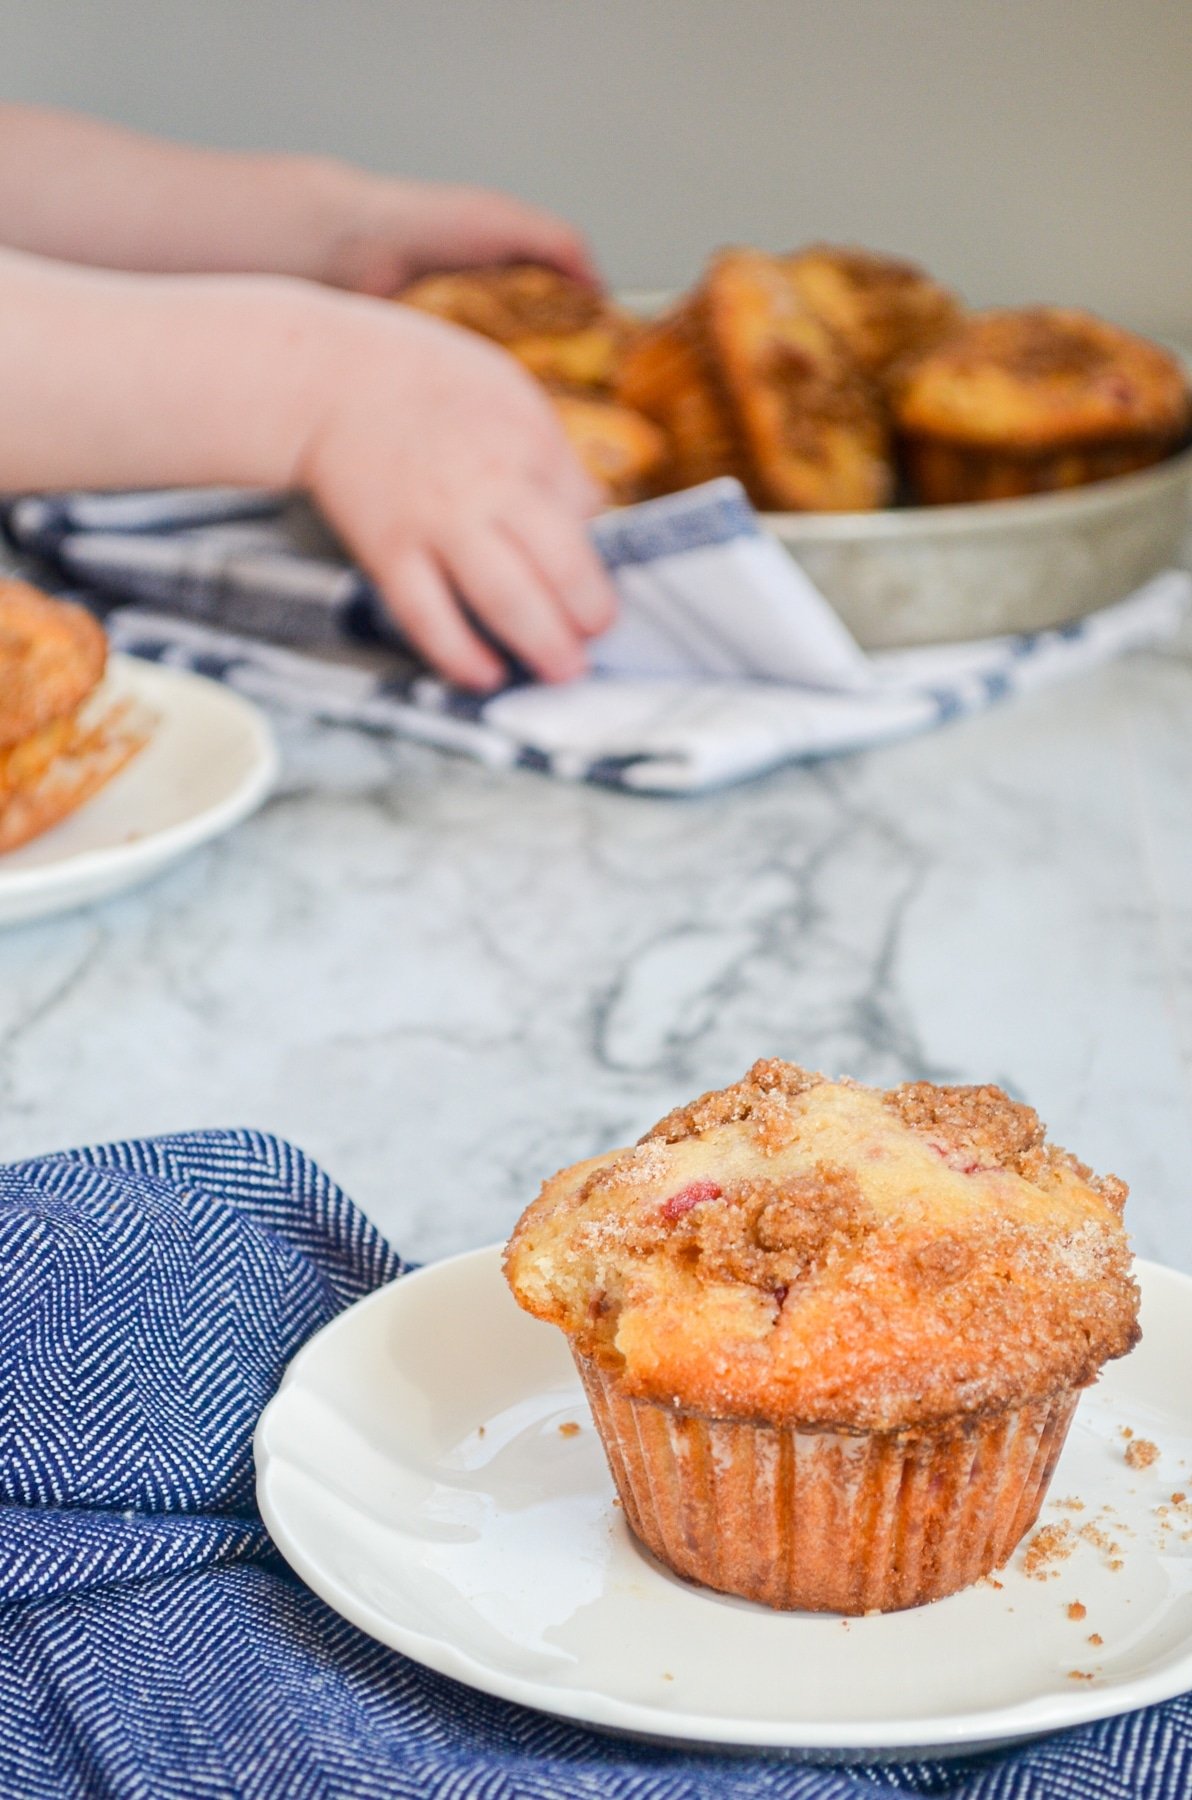 A strawberry buttermilk muffin on a white plate, resting on a blue napkin. In the background, a child lifts up a tray of muffins.